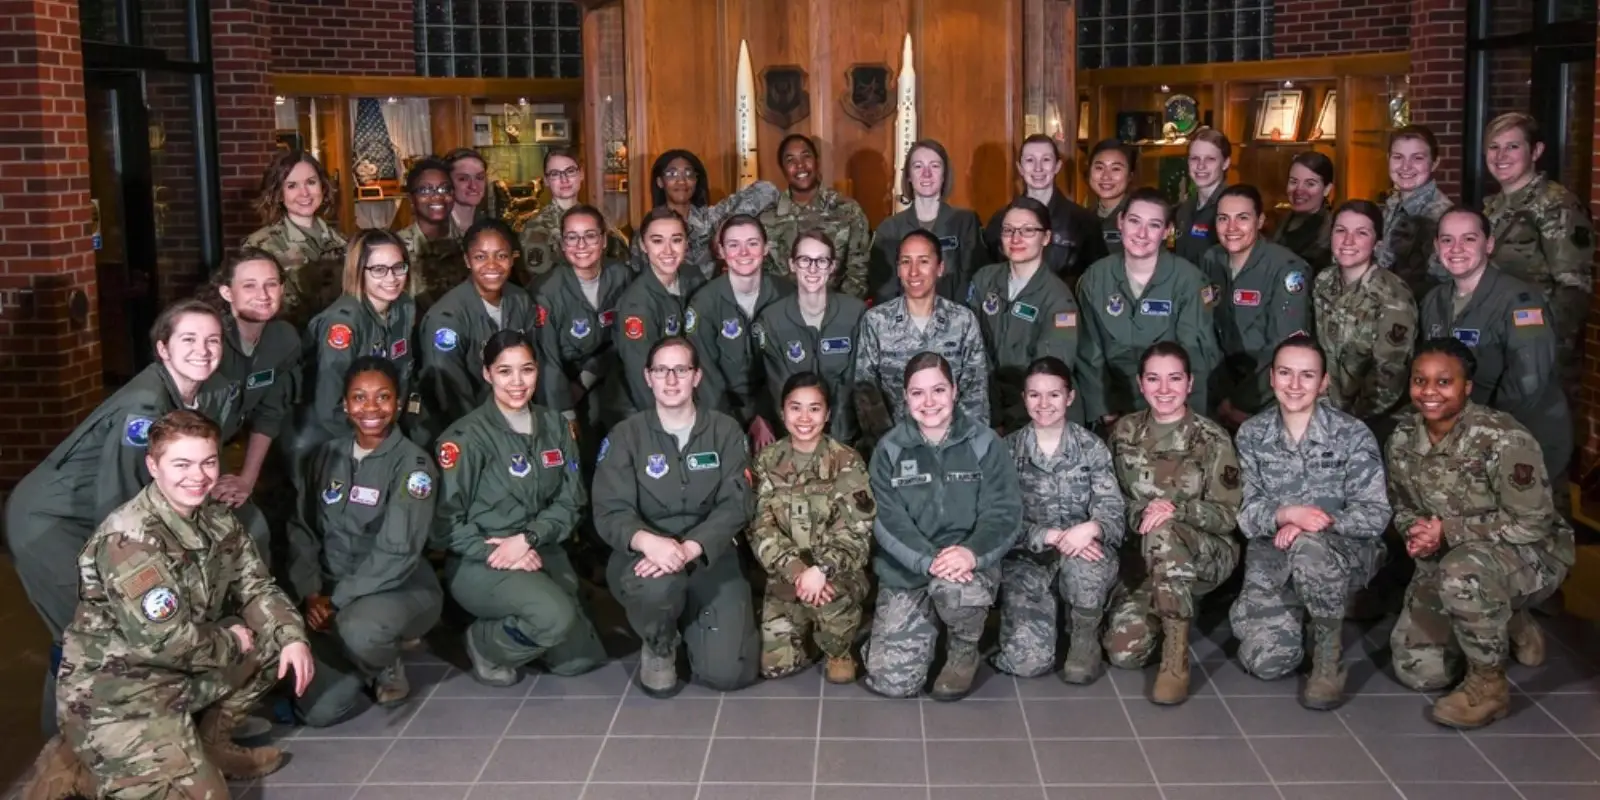 My Base Guide - Dissecting the Challenges Faced By Women in the Military  vs. Their Opportunities